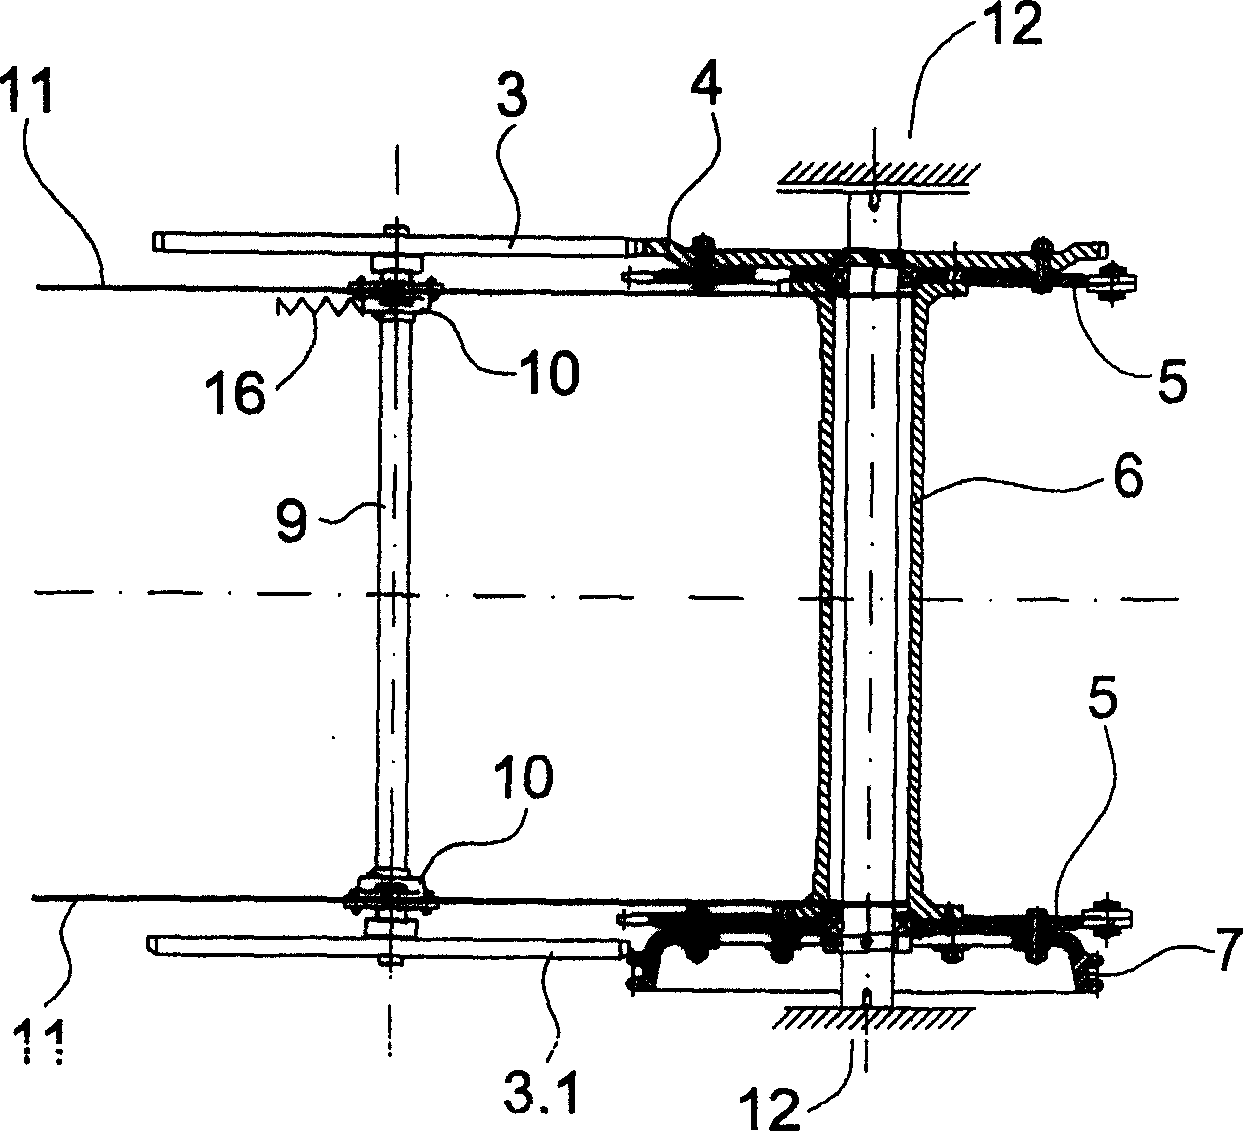 Handrail driving device for escalator or moving walkway